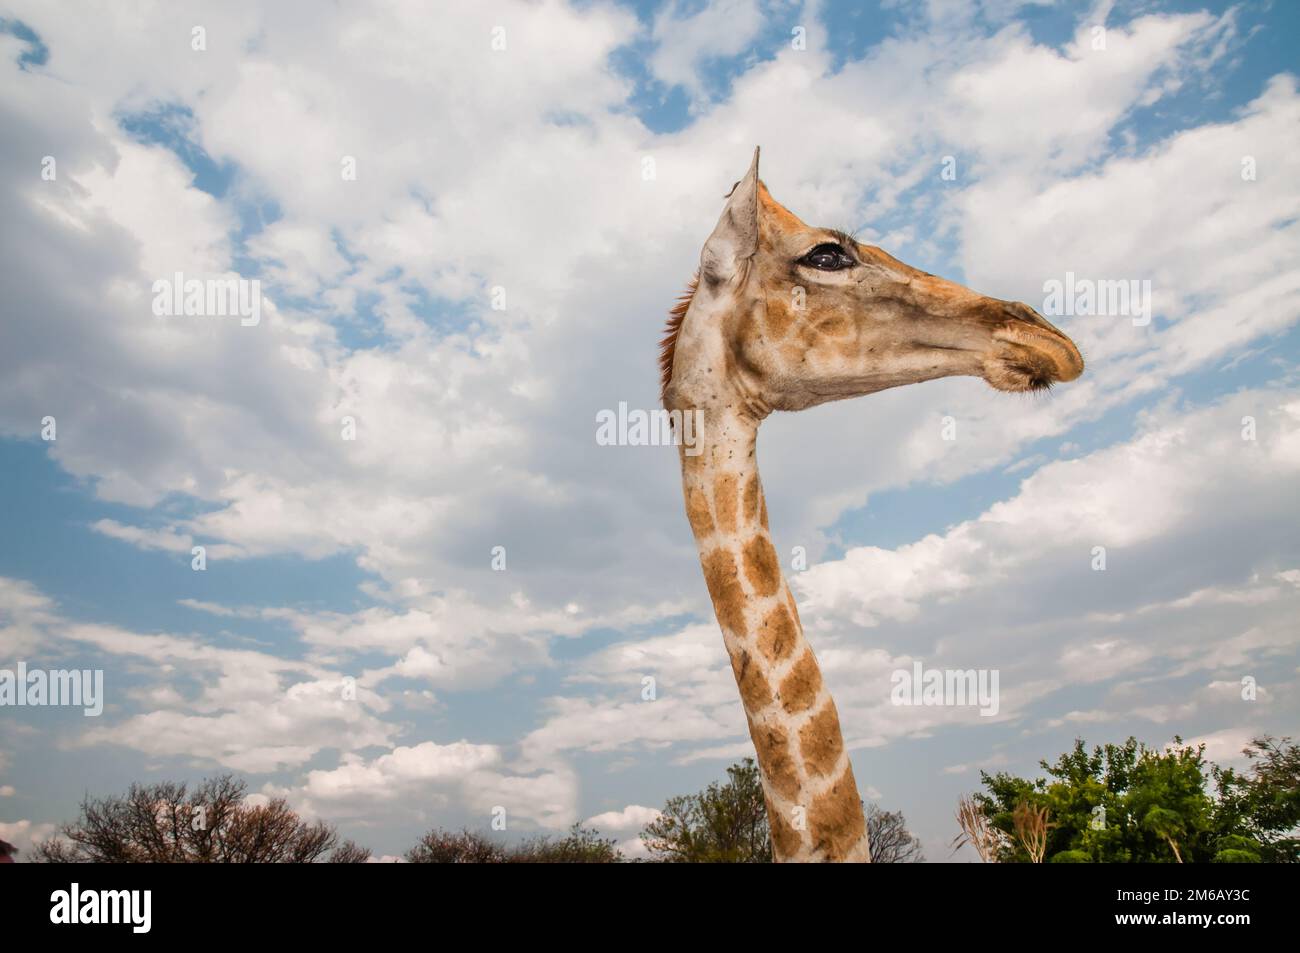 Close up photo of the neck and face of a giraffe. Stock Photo